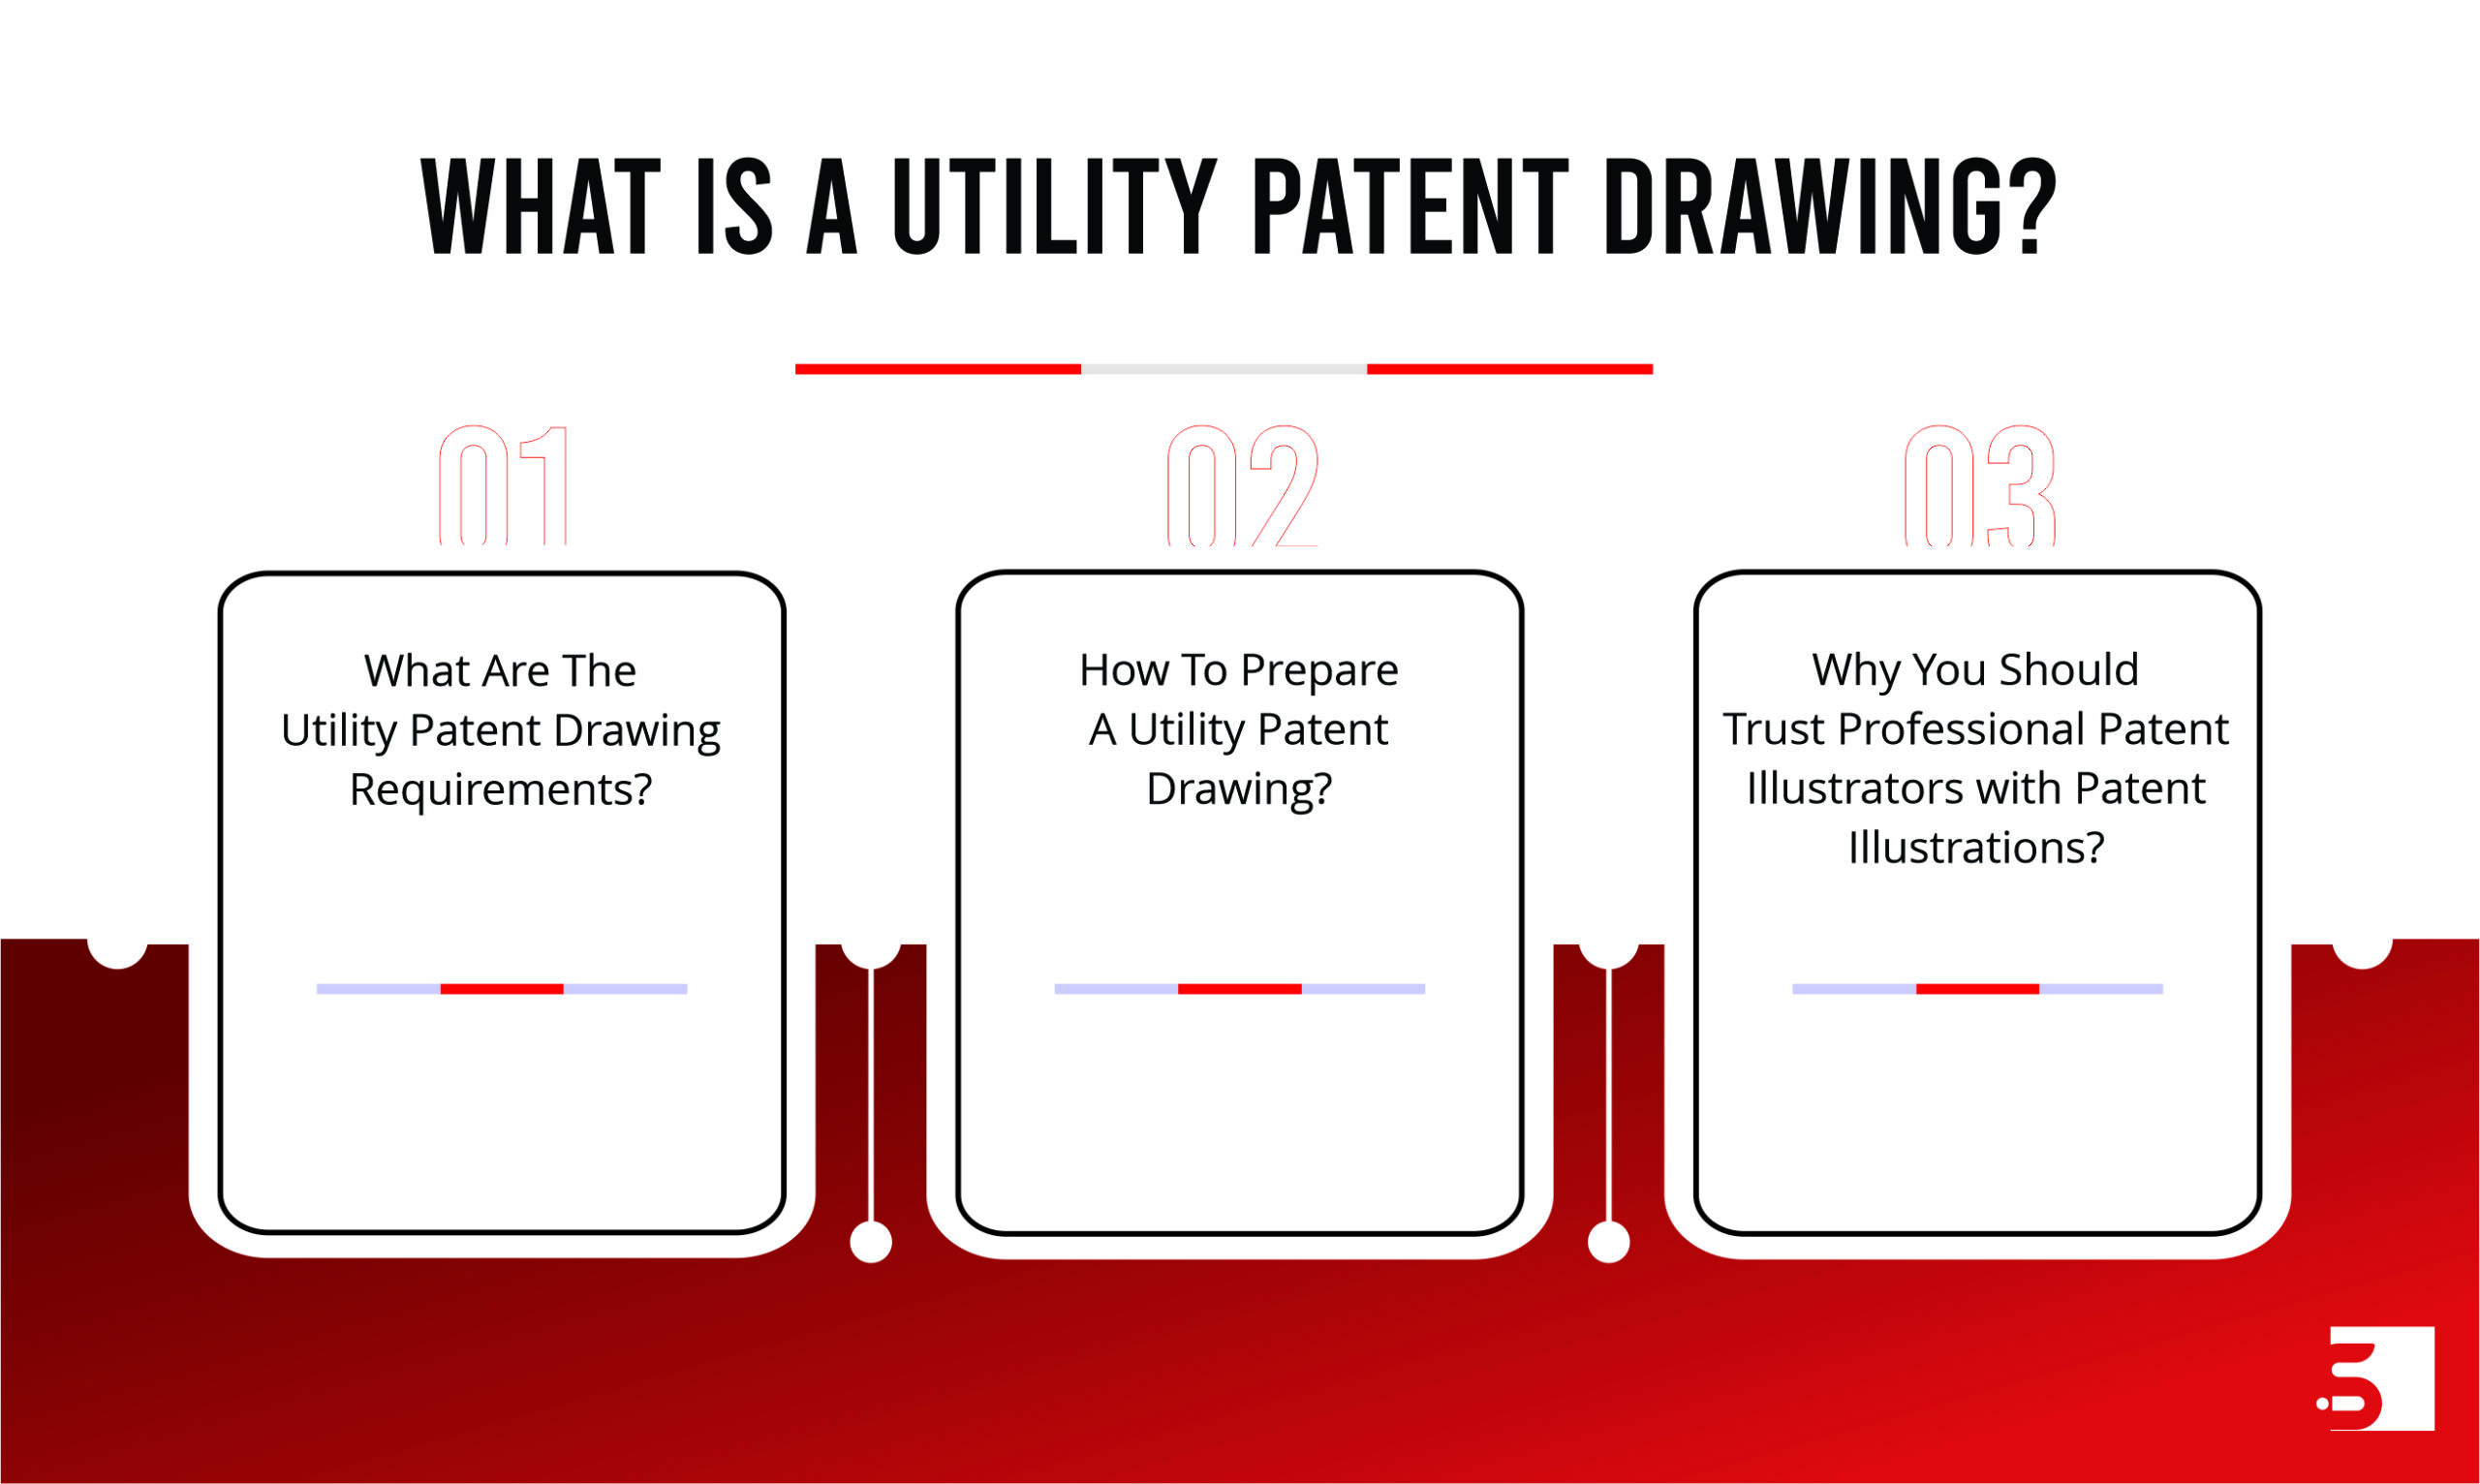 What is a Utility Patent Drawing? Professional Patent Illustrators